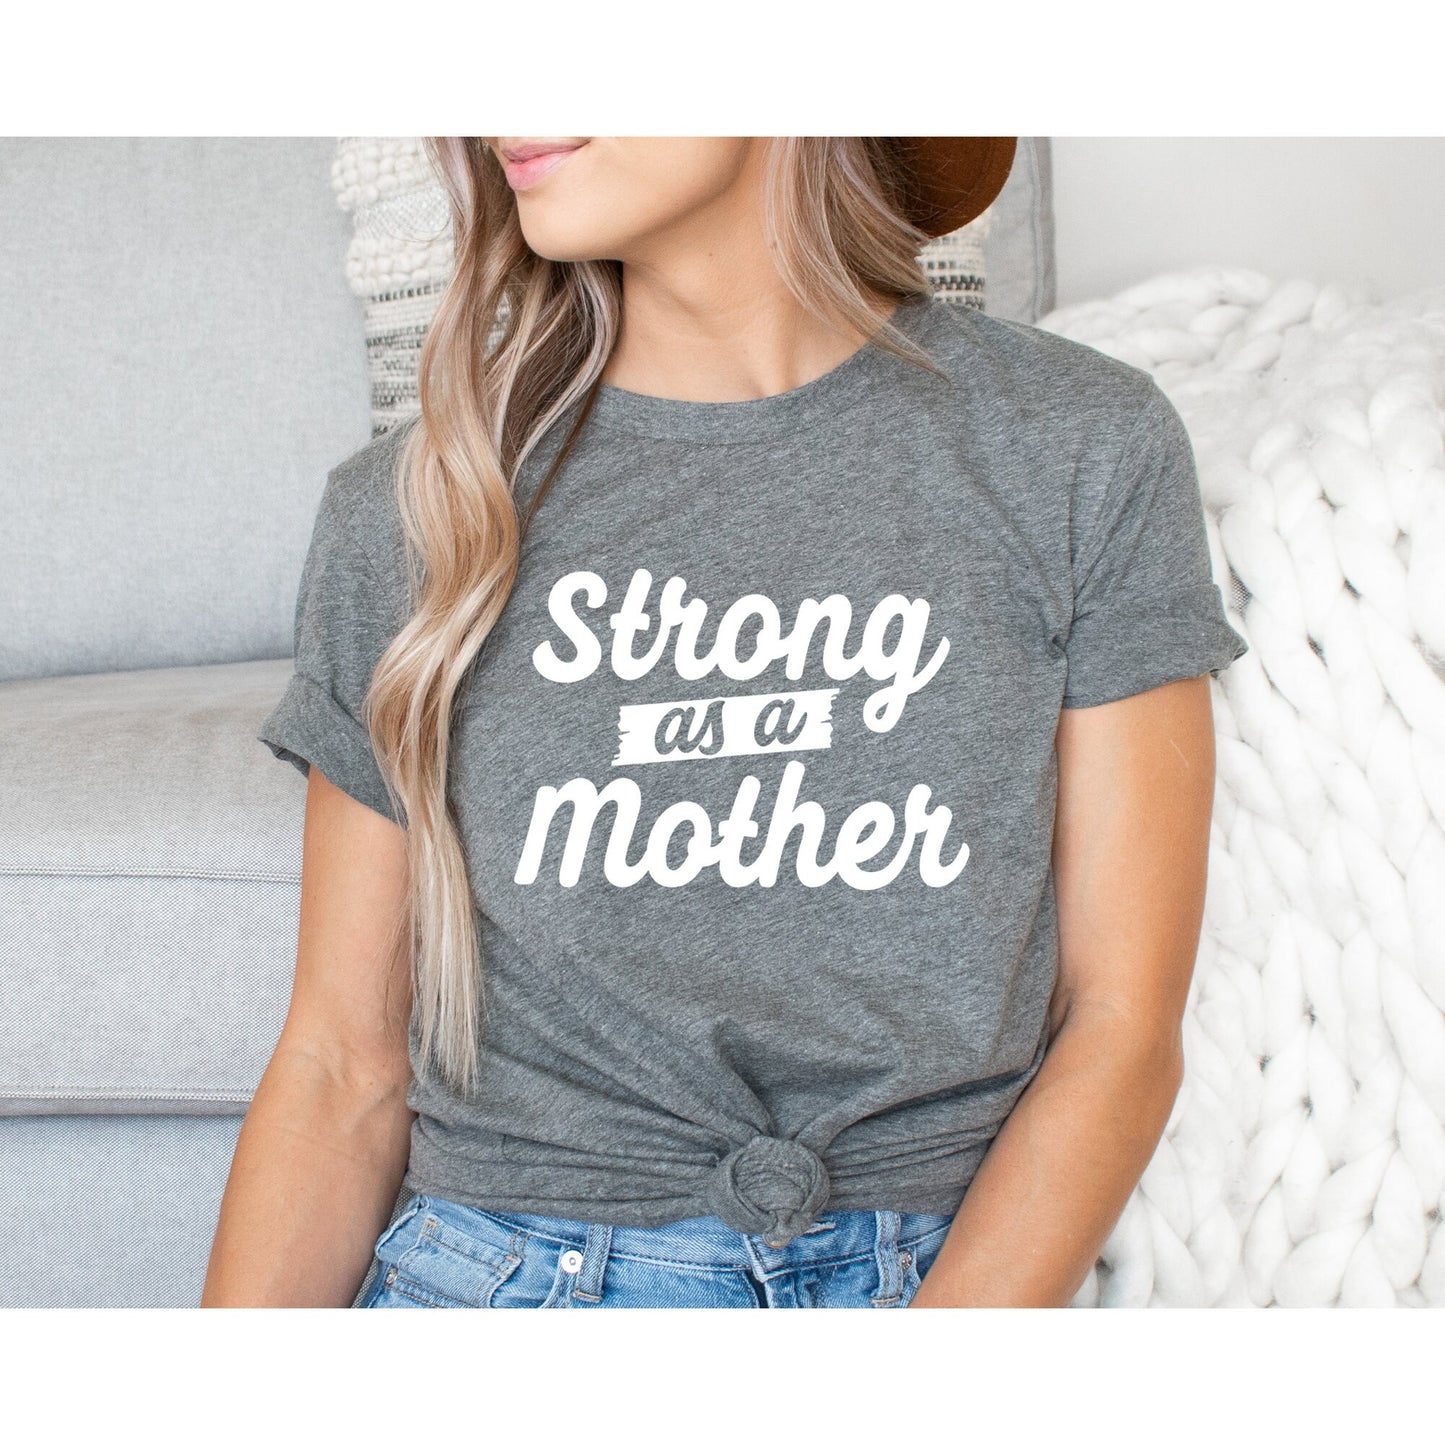 Strong as a Mother, Gifts for Mom, Mom Shirts, Mom-life Shirt, Shirts for Moms, Trendy Mom T-Shirts, Cool Mom Shirts, Shirts for Moms